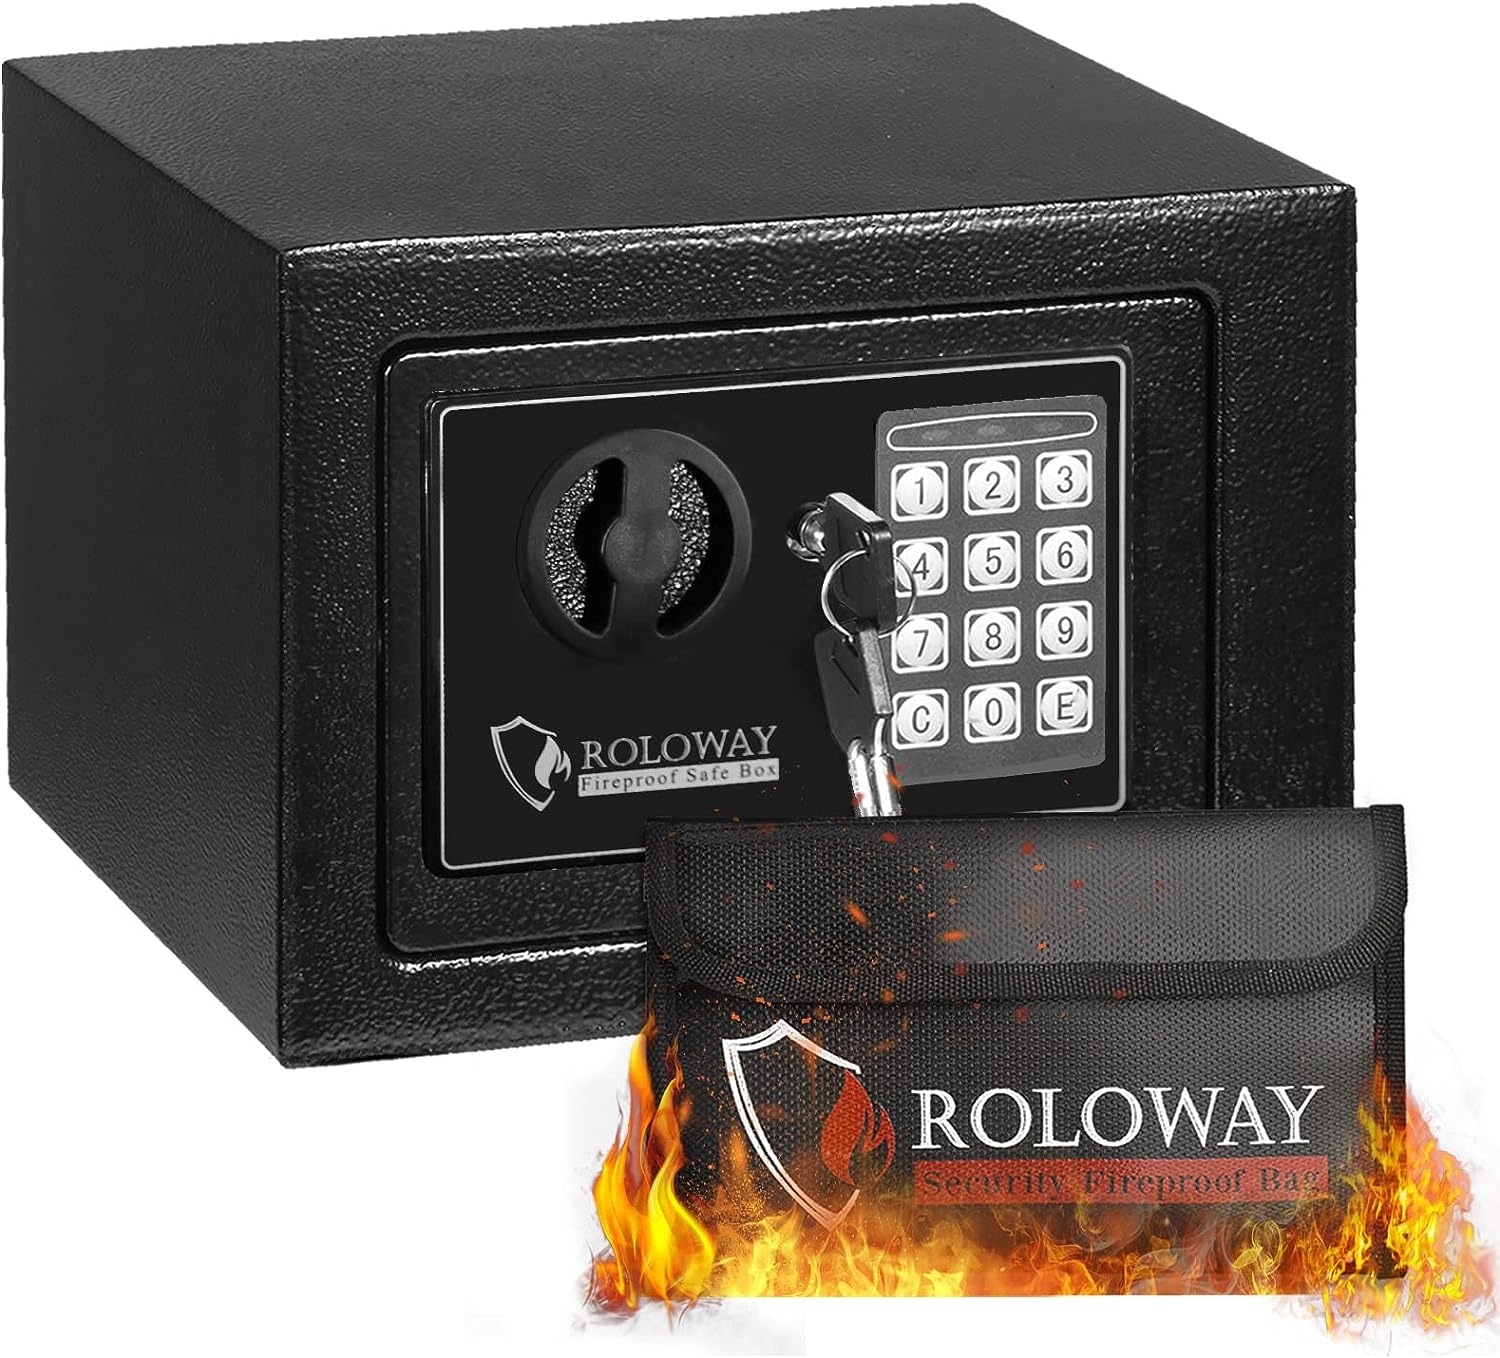 ROLOWAY Steel Safe for Money | DeviceDaily.com